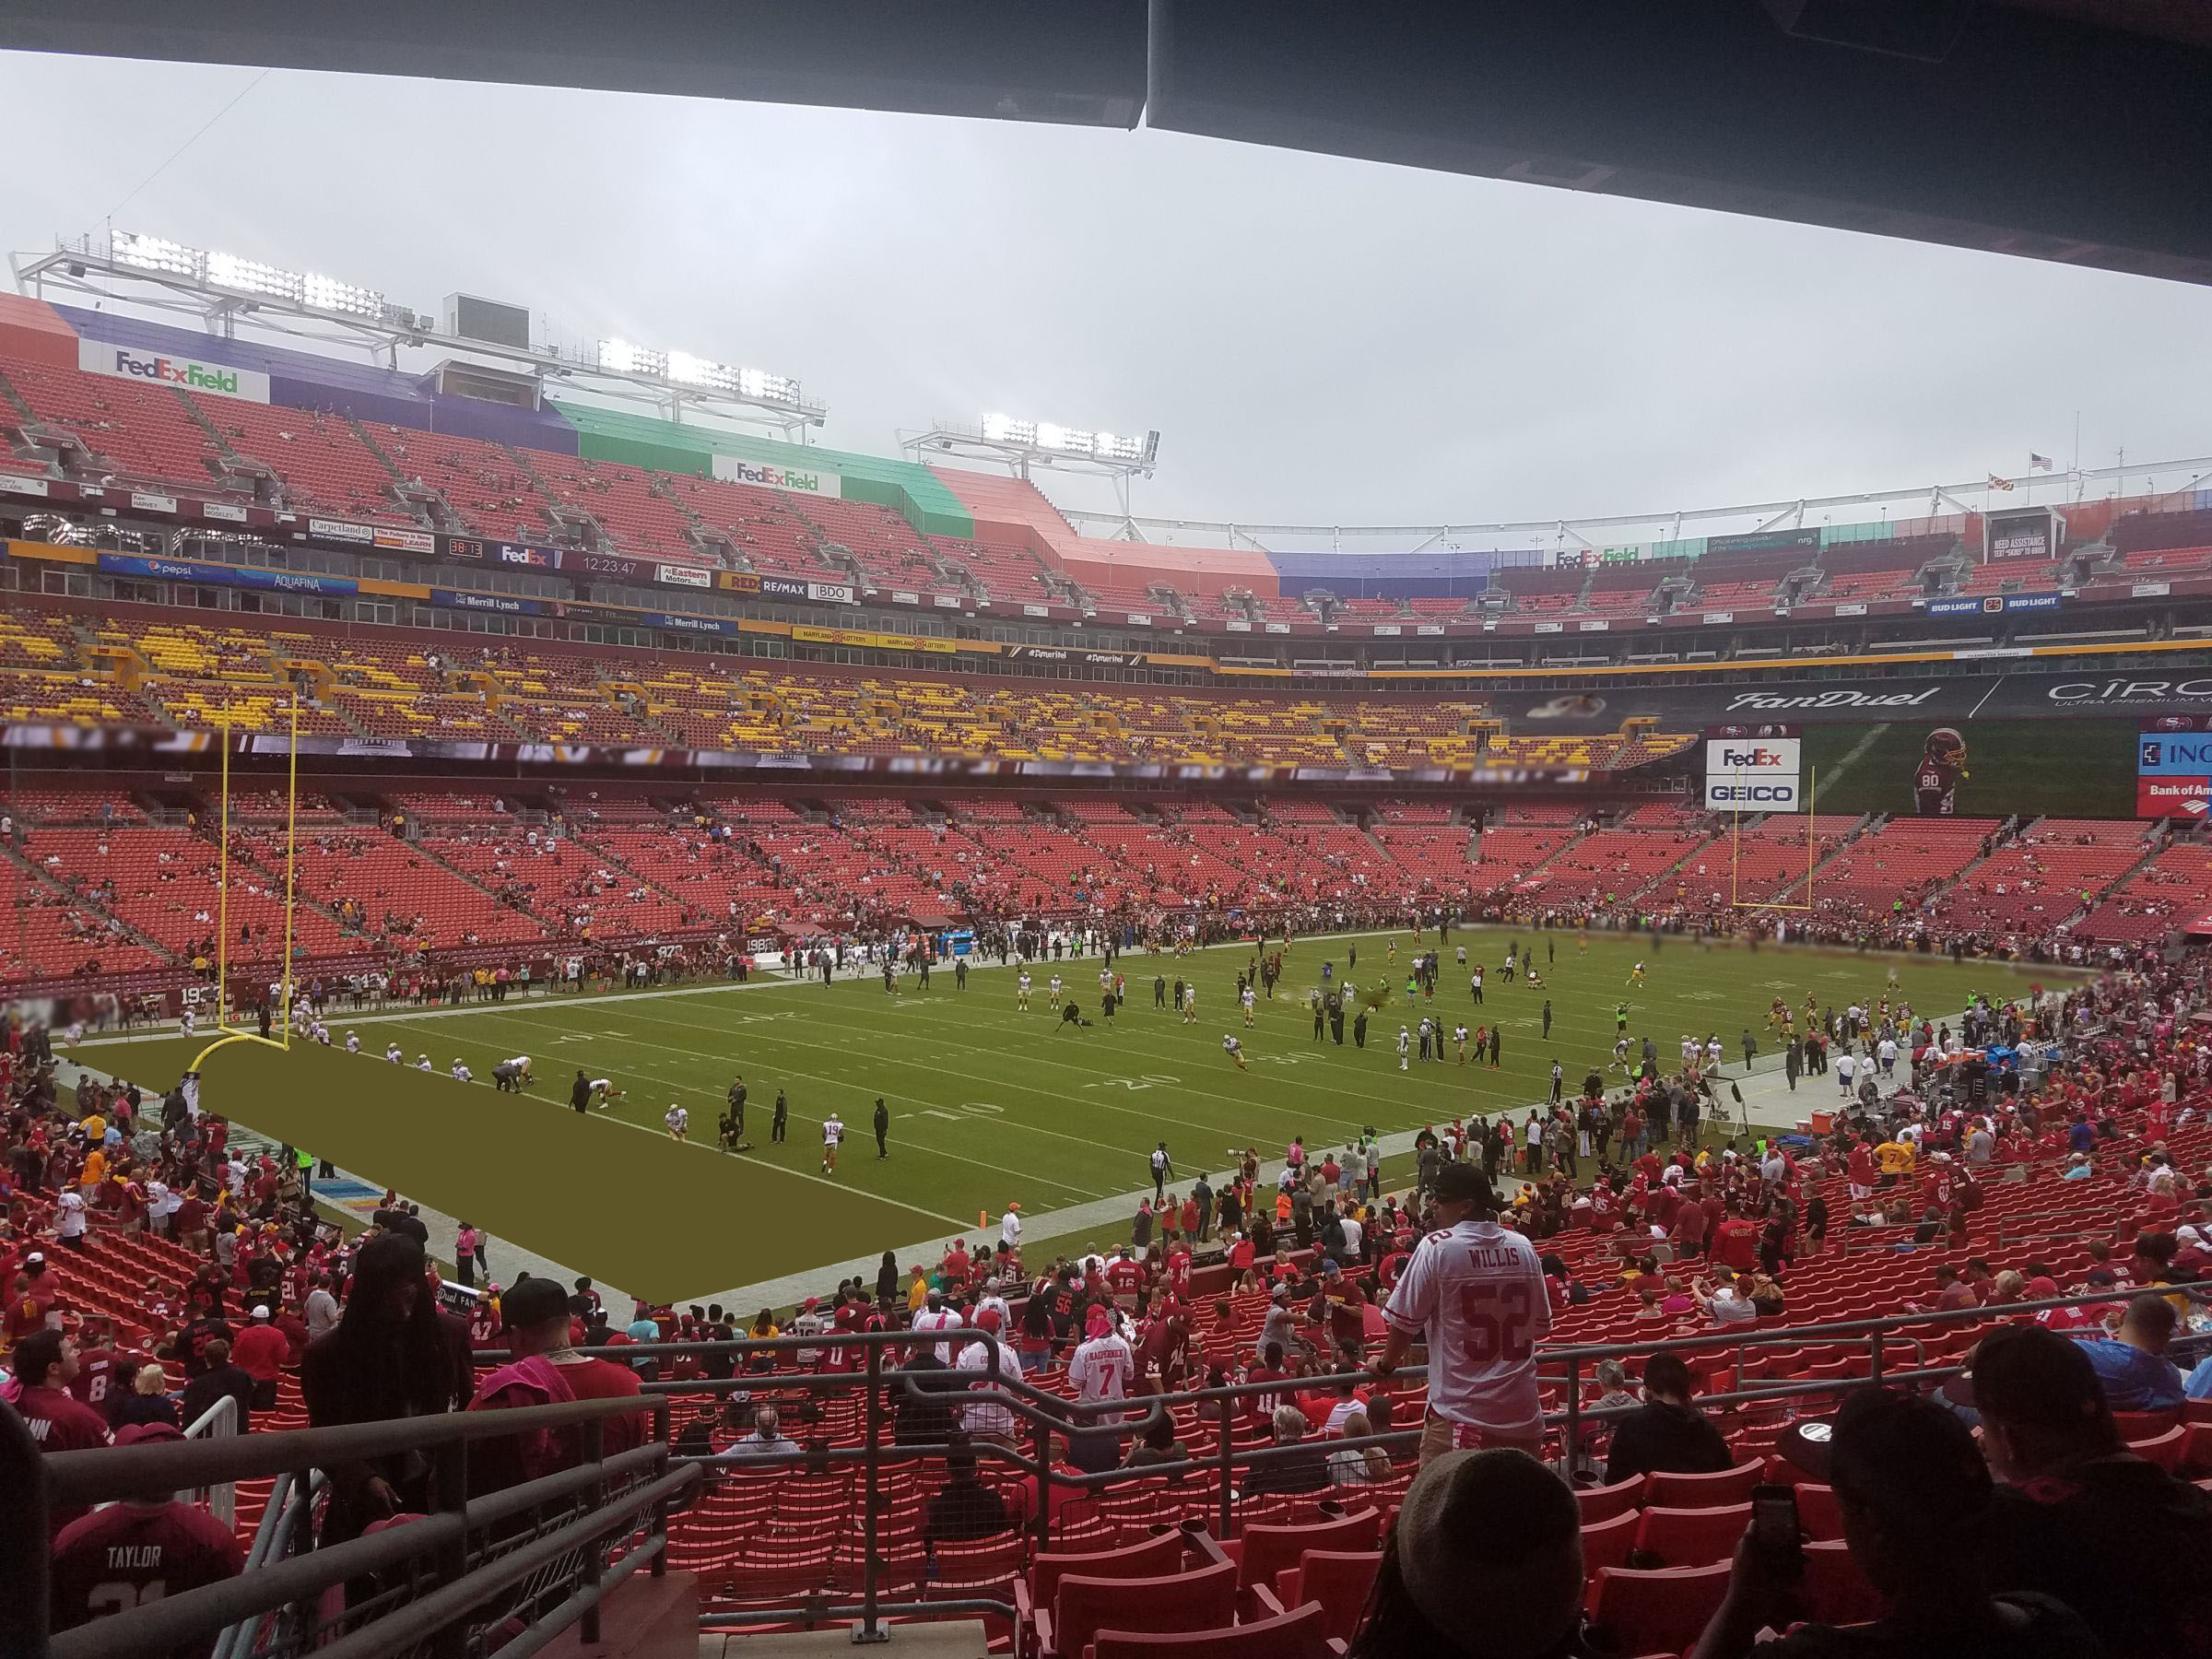 section 227, row 8 seat view  - fedexfield